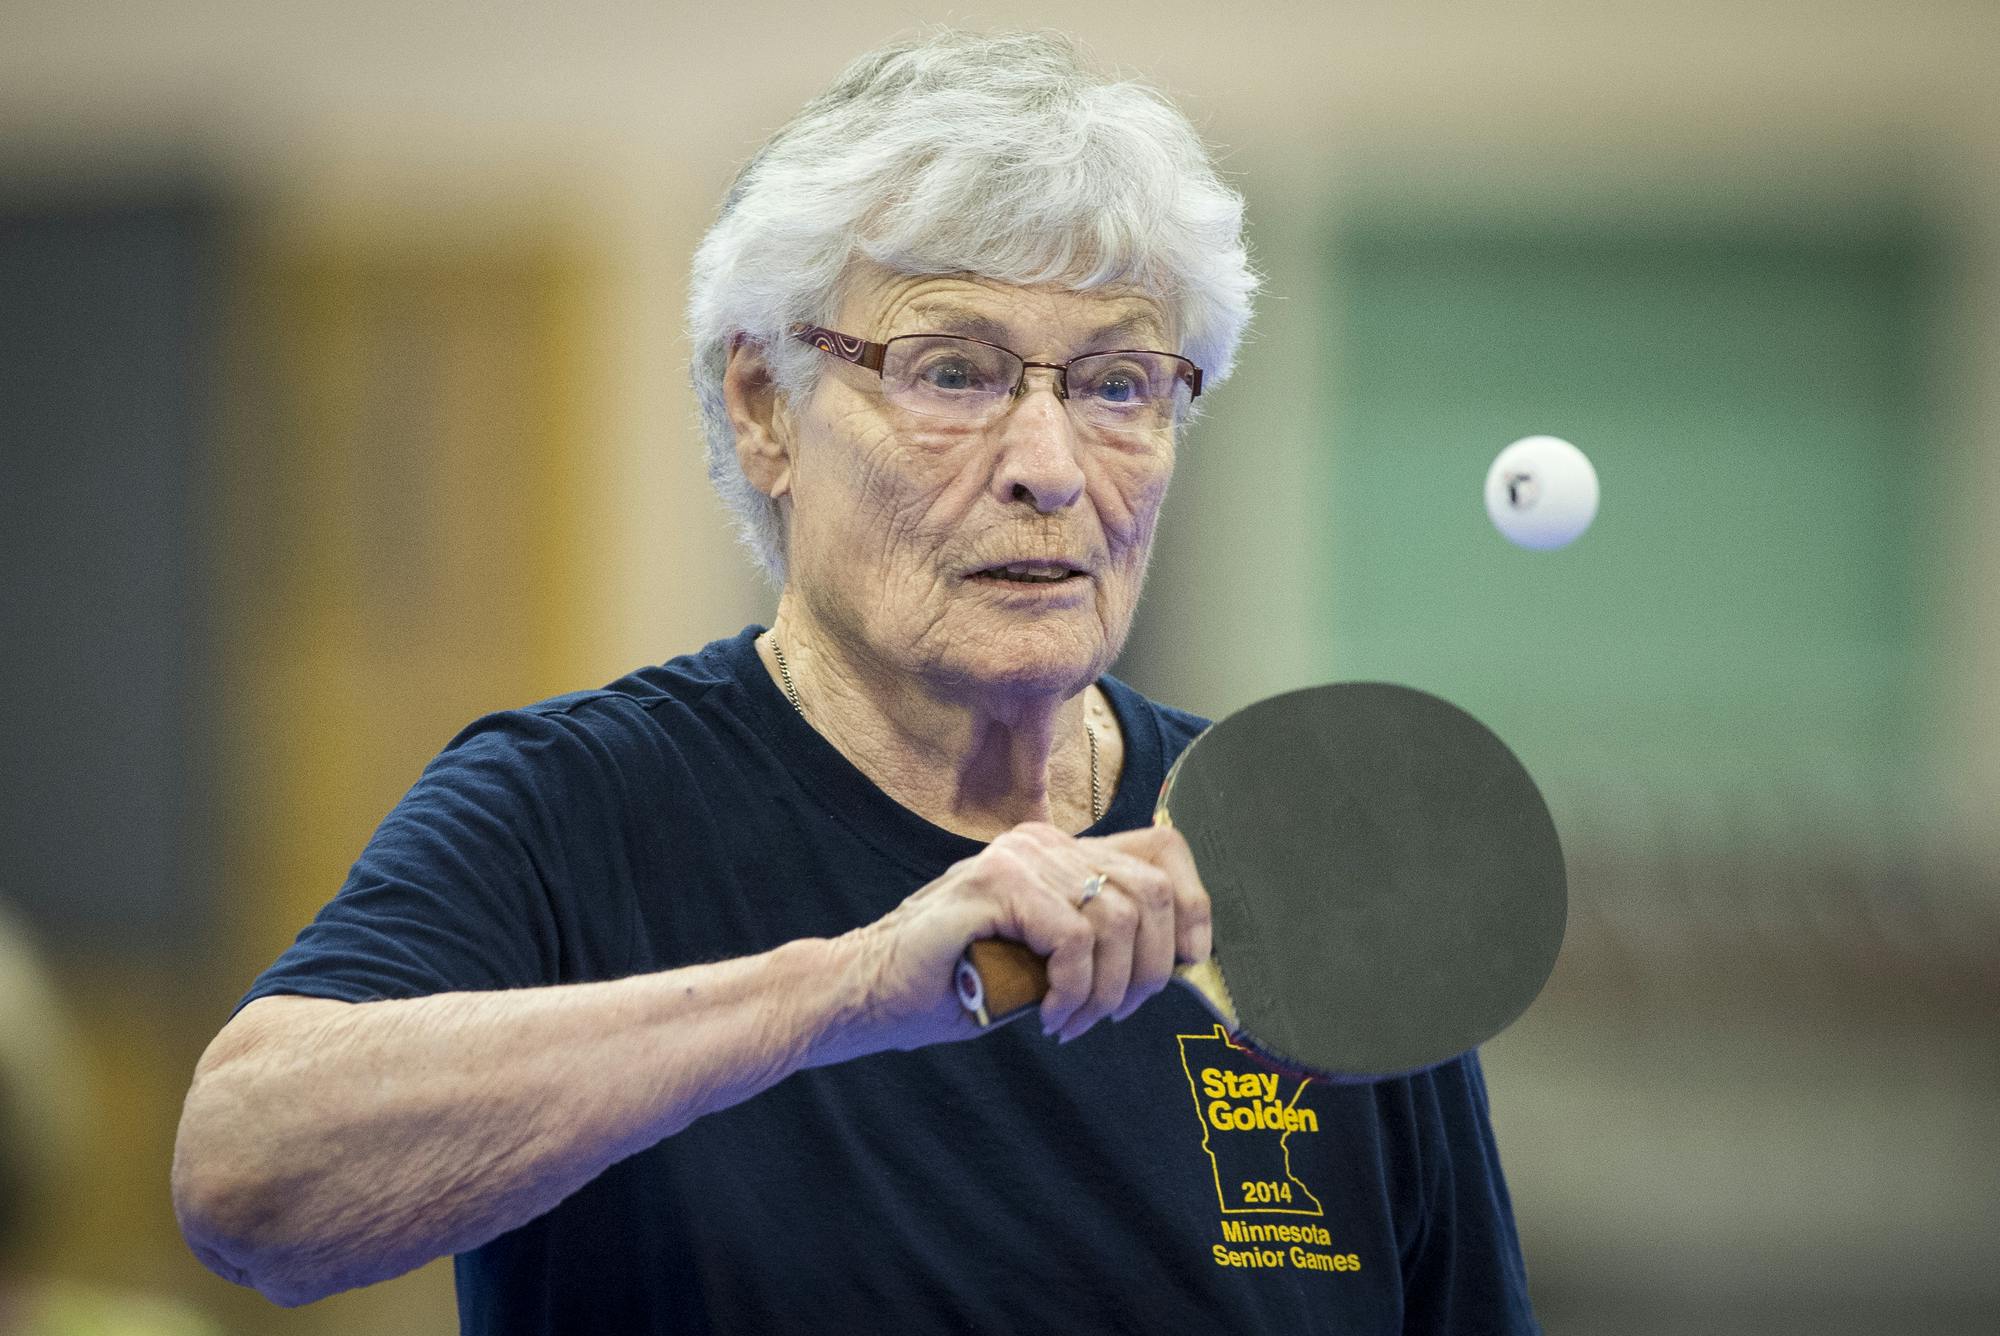 Mankato woman, 91, is never too old for table tennis